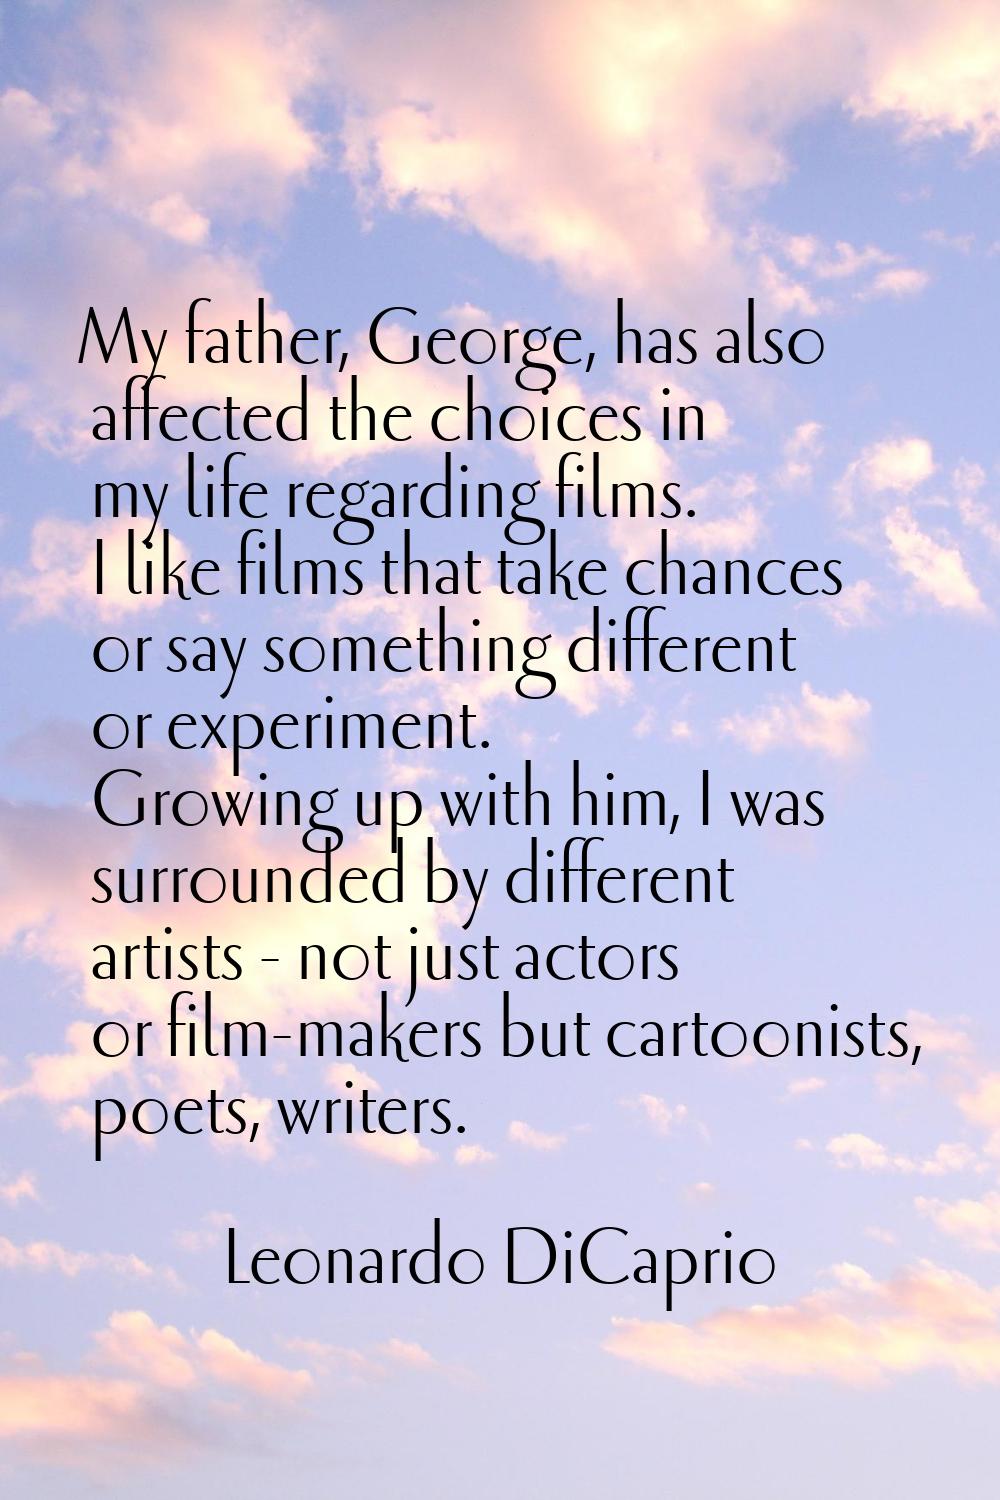 My father, George, has also affected the choices in my life regarding films. I like films that take